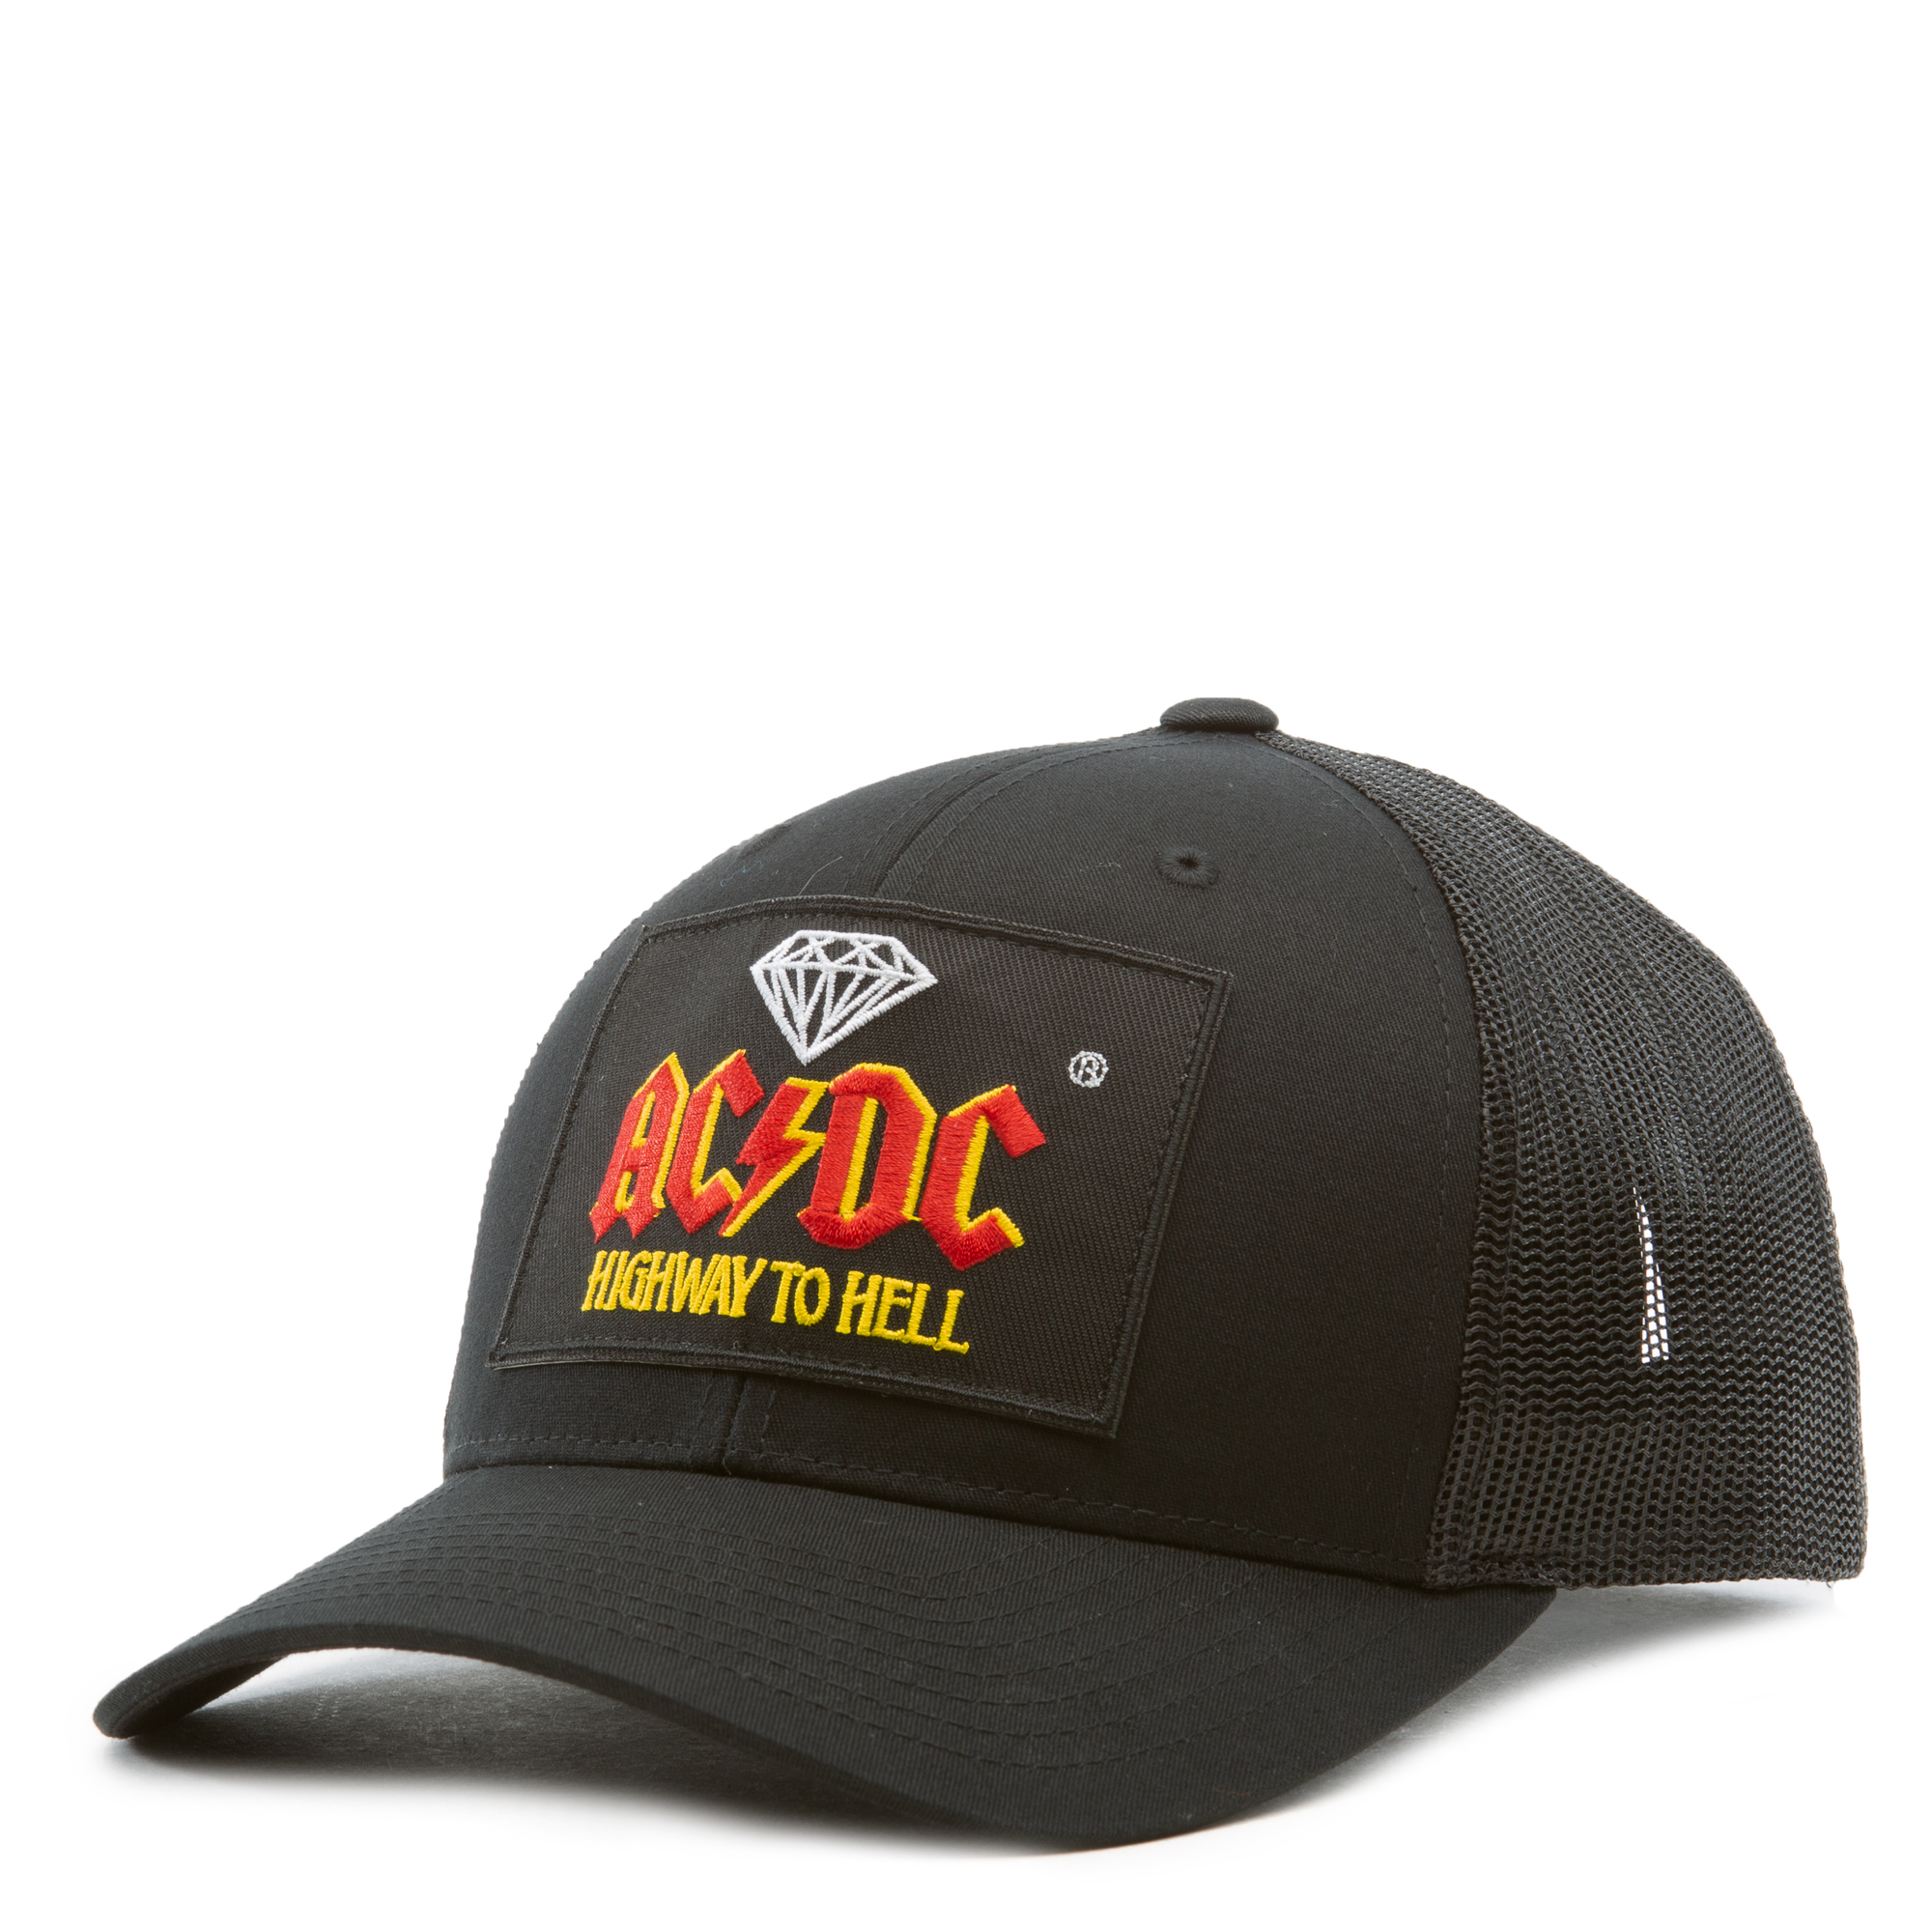 highway to hell hat